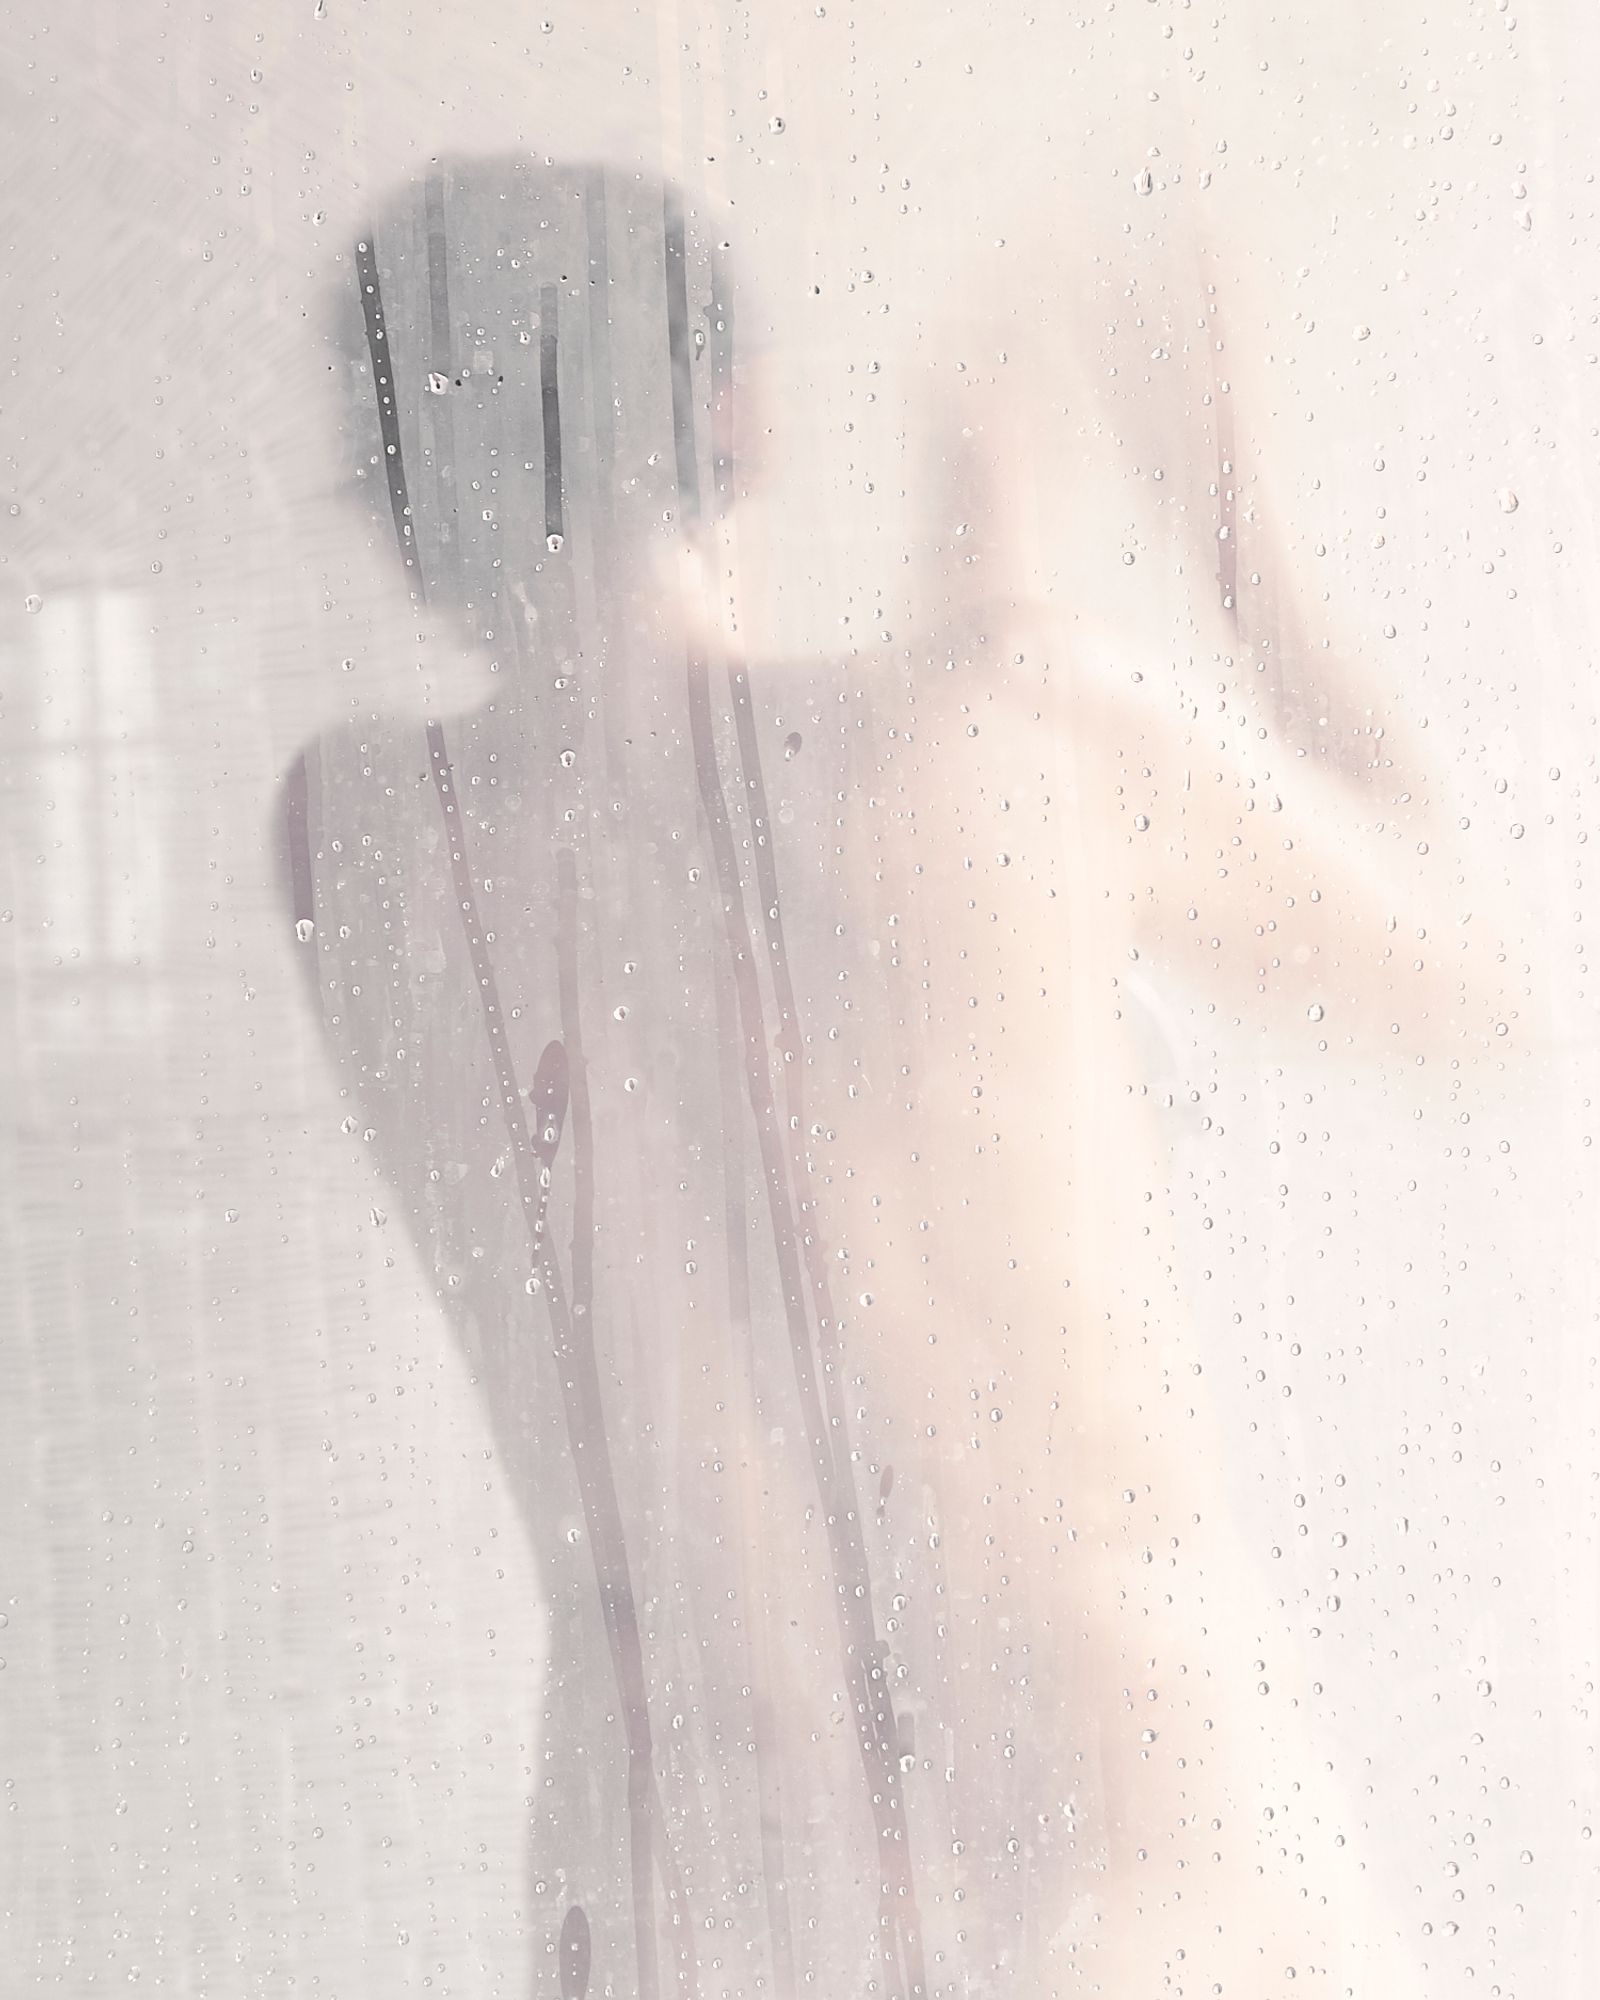 © Tati Vicedomine - Image from the You can even cry in the shower photography project